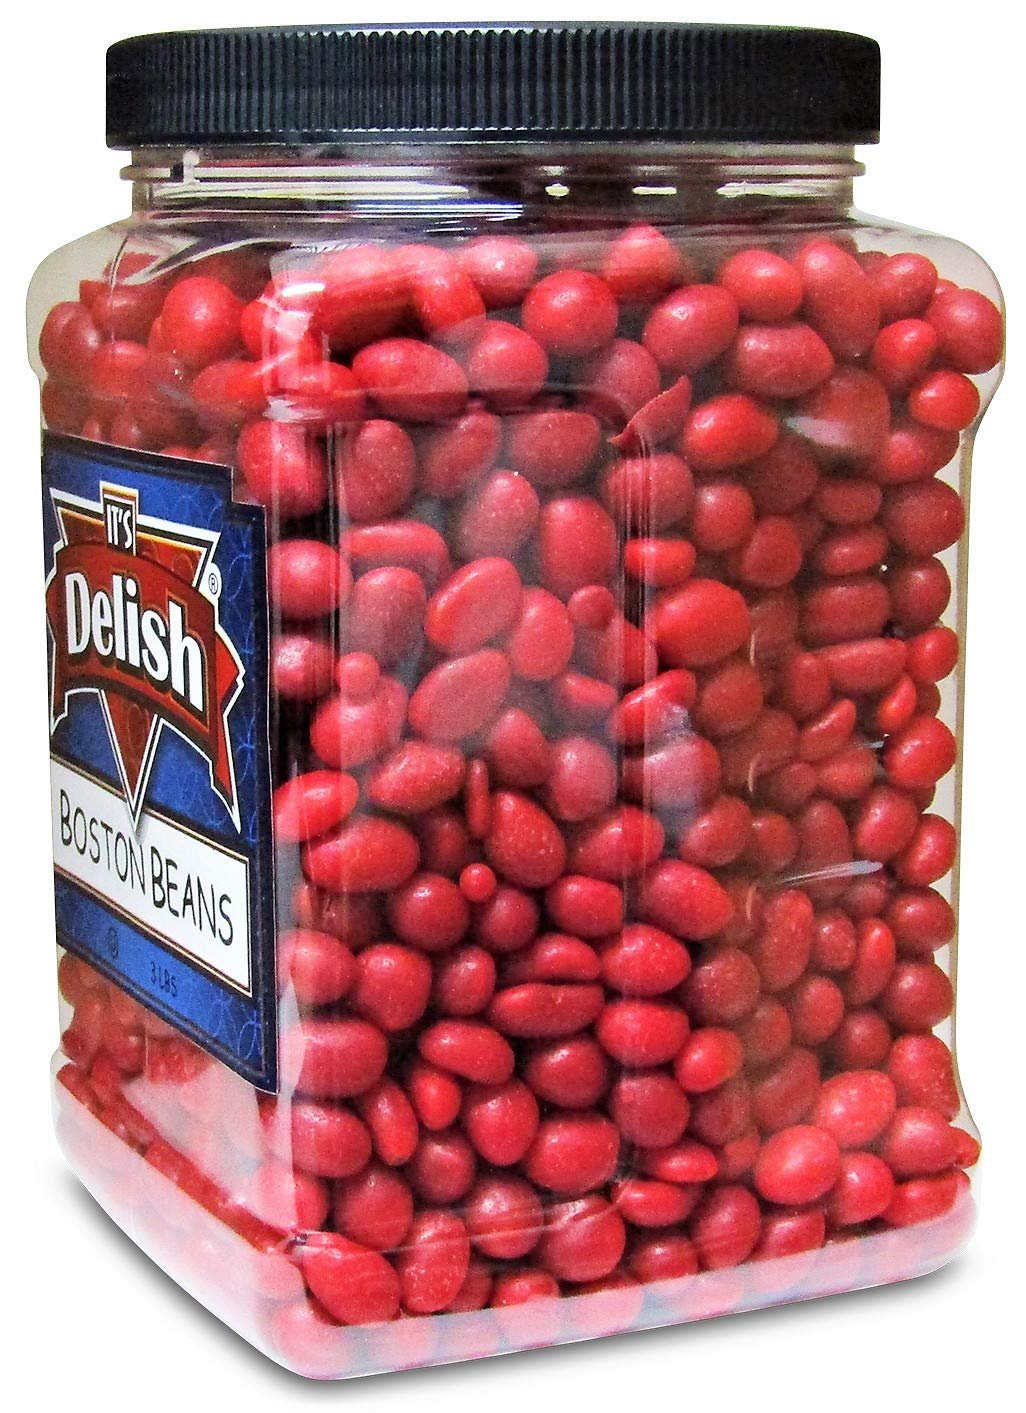 Boston Baked Beans Candy Coated Peanuts , 3 LBS Jumbo Reusable Contain